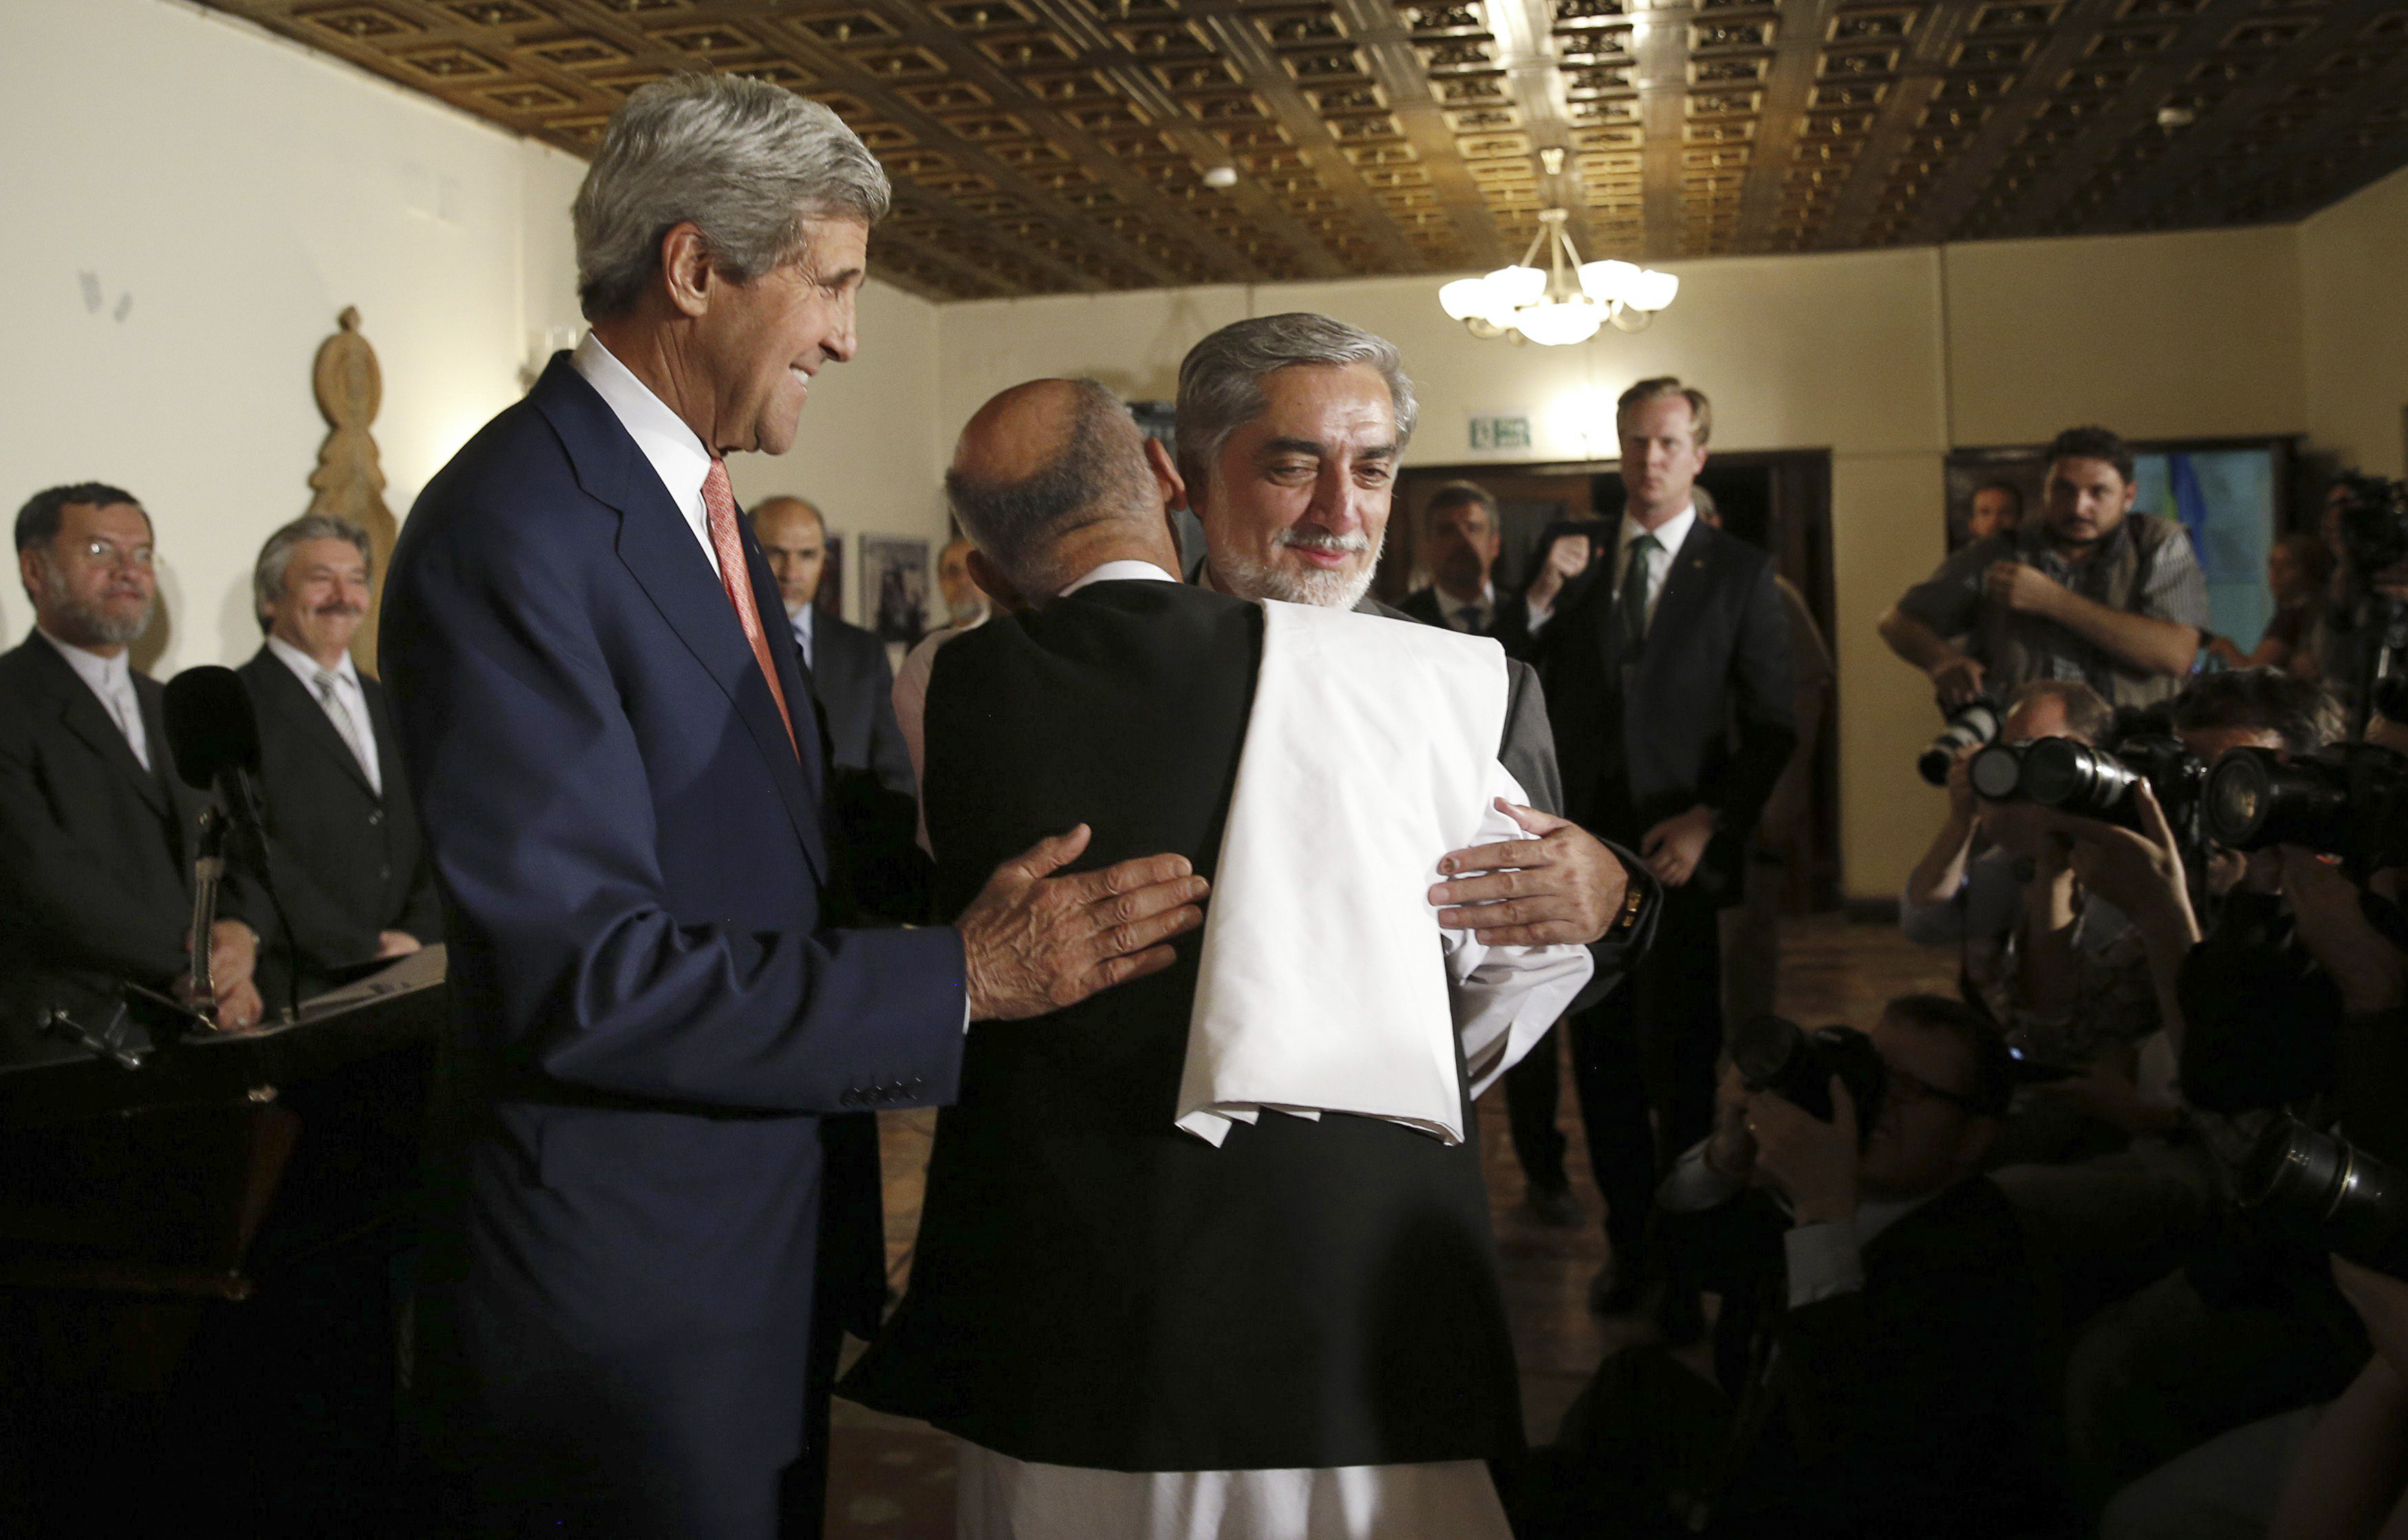 Presidential candidates Abdullah Abdullah, right, and Ashraf Ghani embrace at a news conference with Secretary of State John Kerry where a deal to audit ballots was announced, in Kabul, Afghanistan on July 12, 2014.